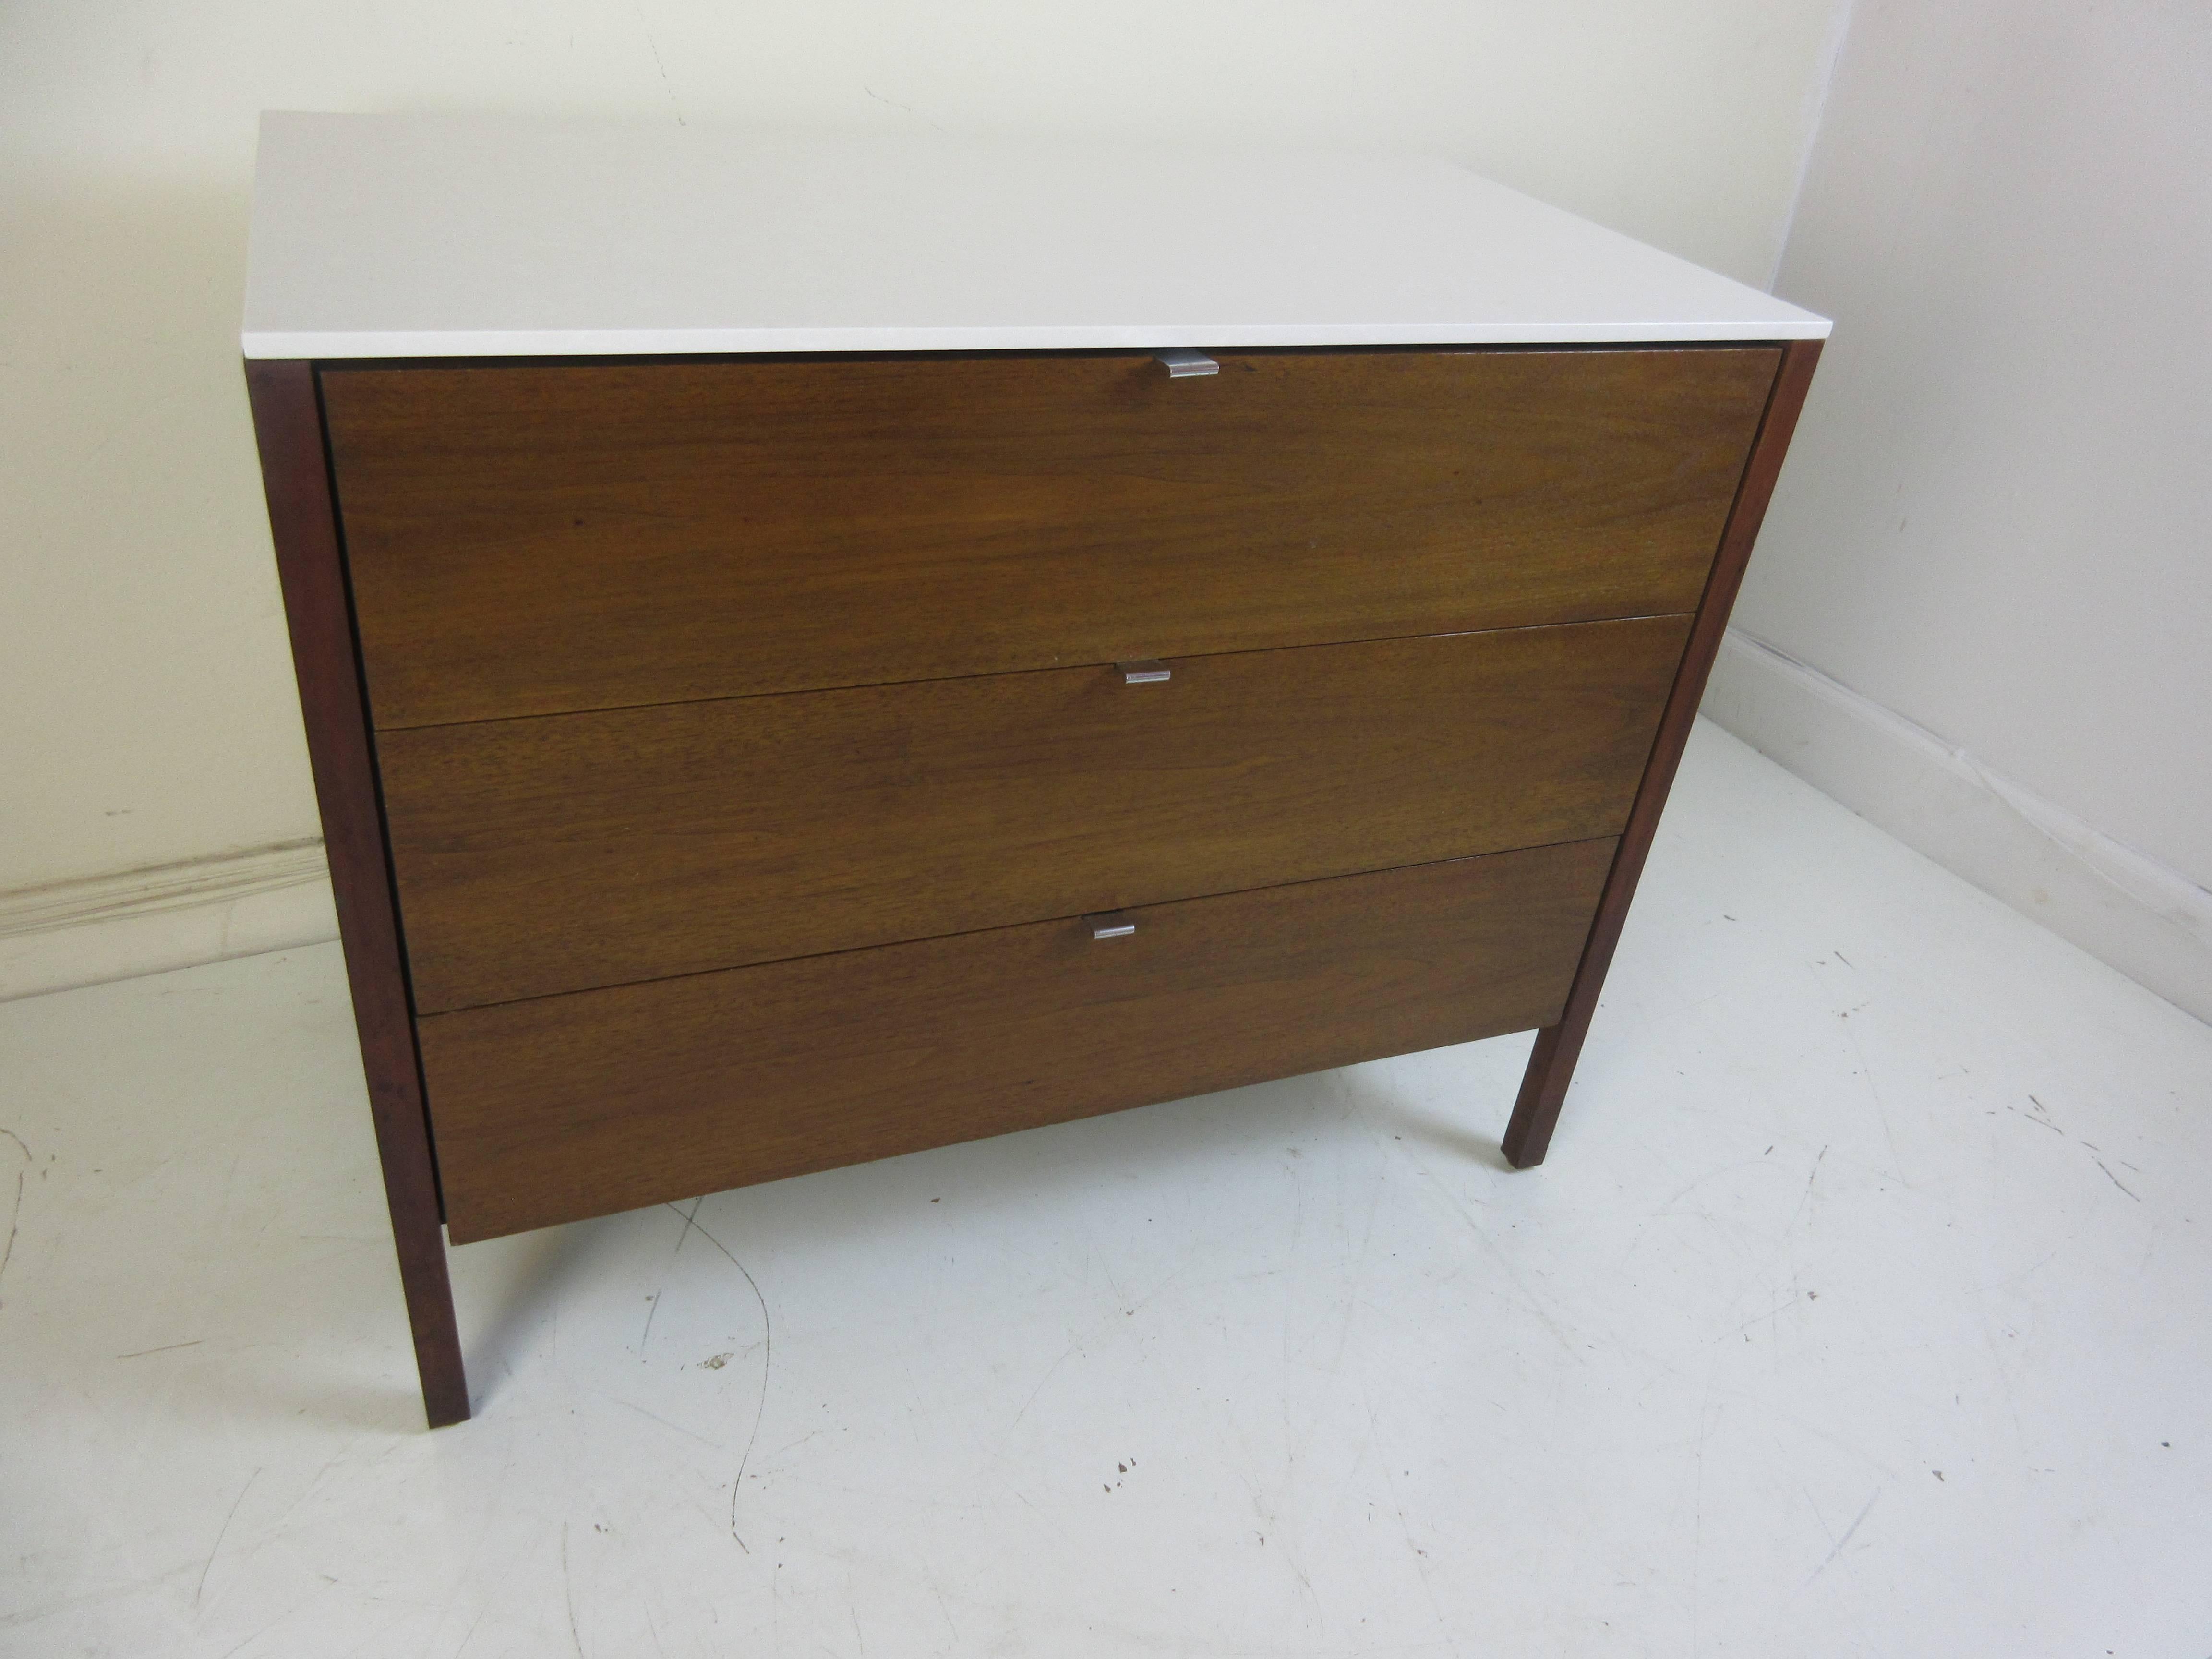 Florence Knoll for Knoll three-drawer cabinet with replacement silestone top (replaces a chipped white formica top) Also available is a four drawer cabinet in slightly lighter tone of walnut with same silestone top in white.